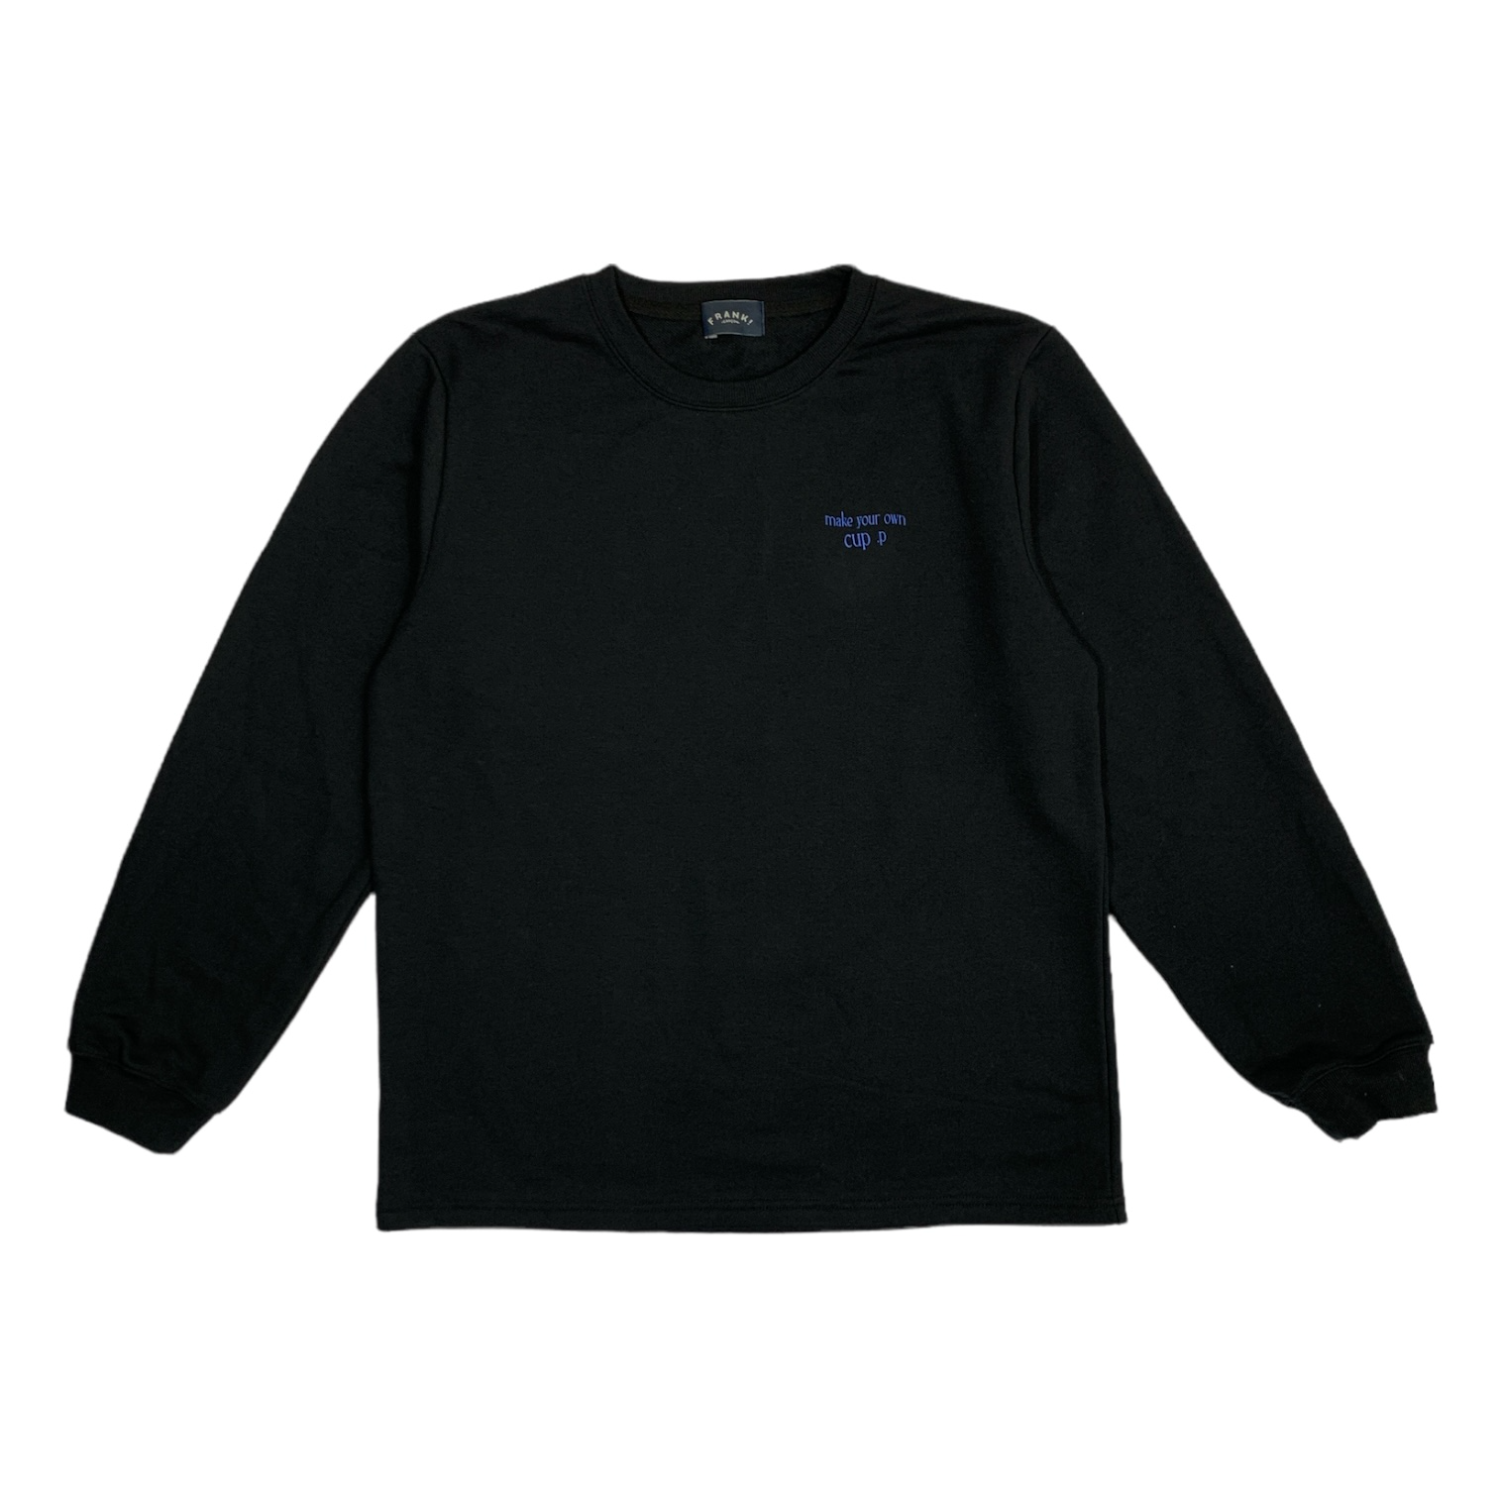 Make Your Own Sweaters (Black)